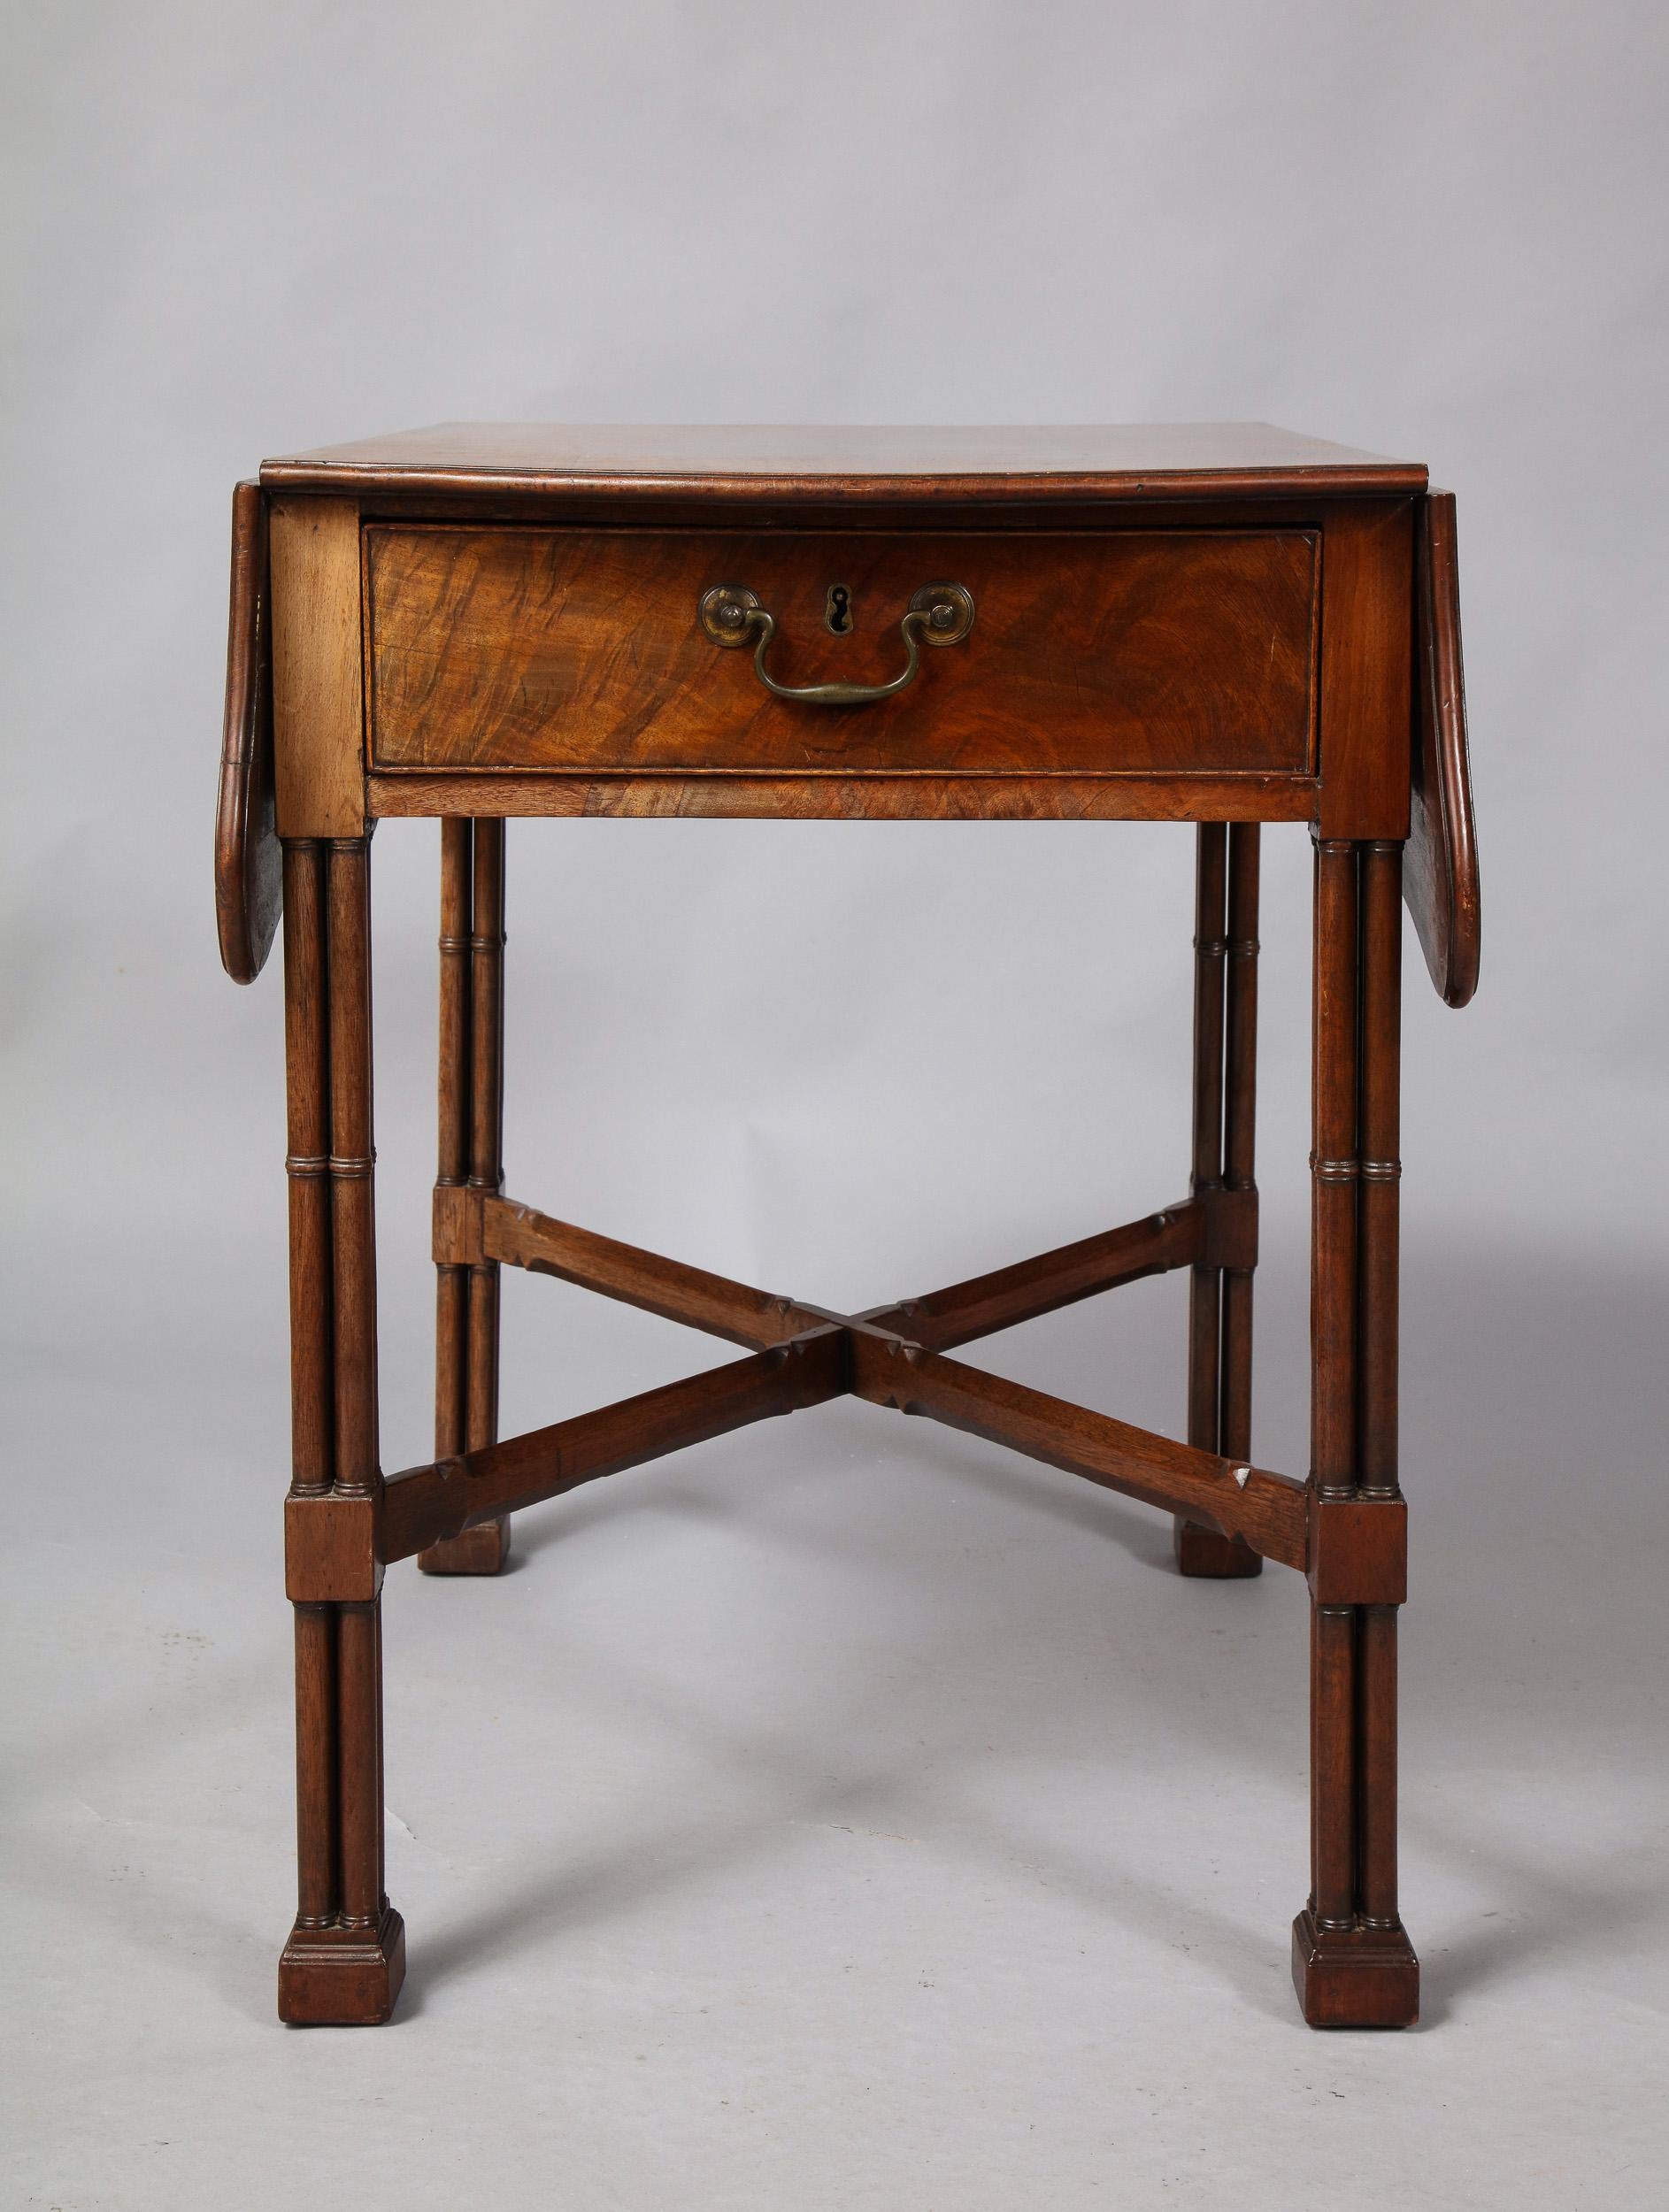 Georgian Pembroke Table in the Manner of Thomas Chippendale 2